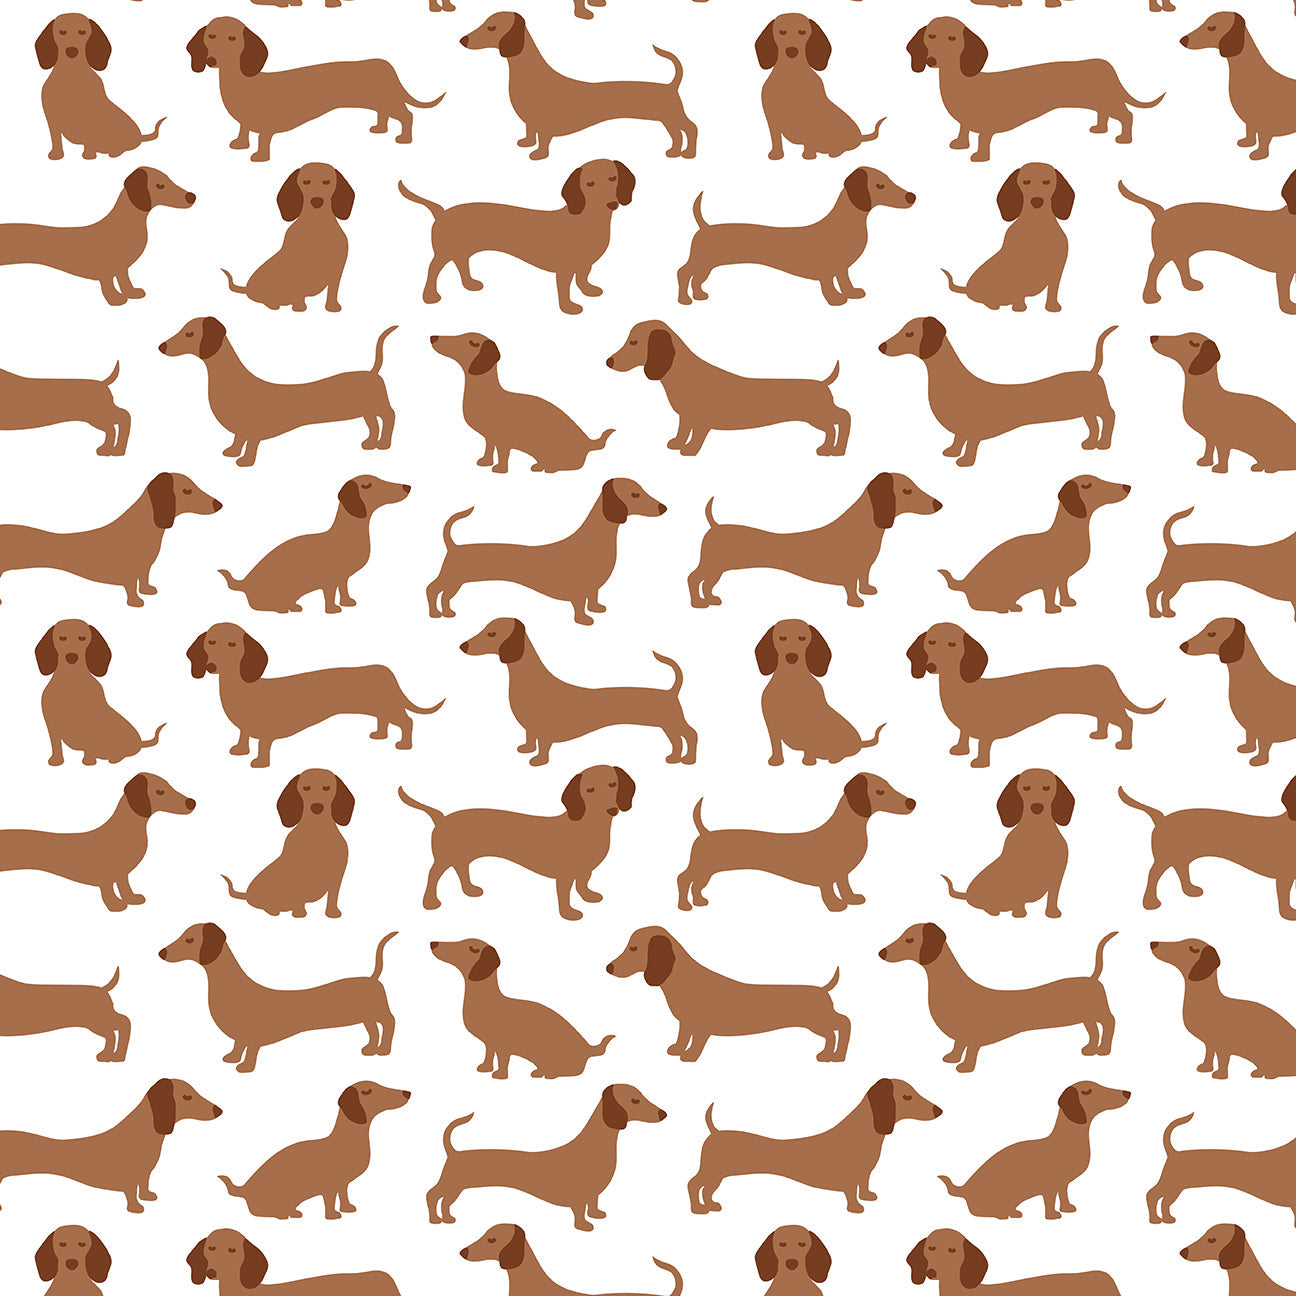 Chicago Dress - Dachshunds Brown